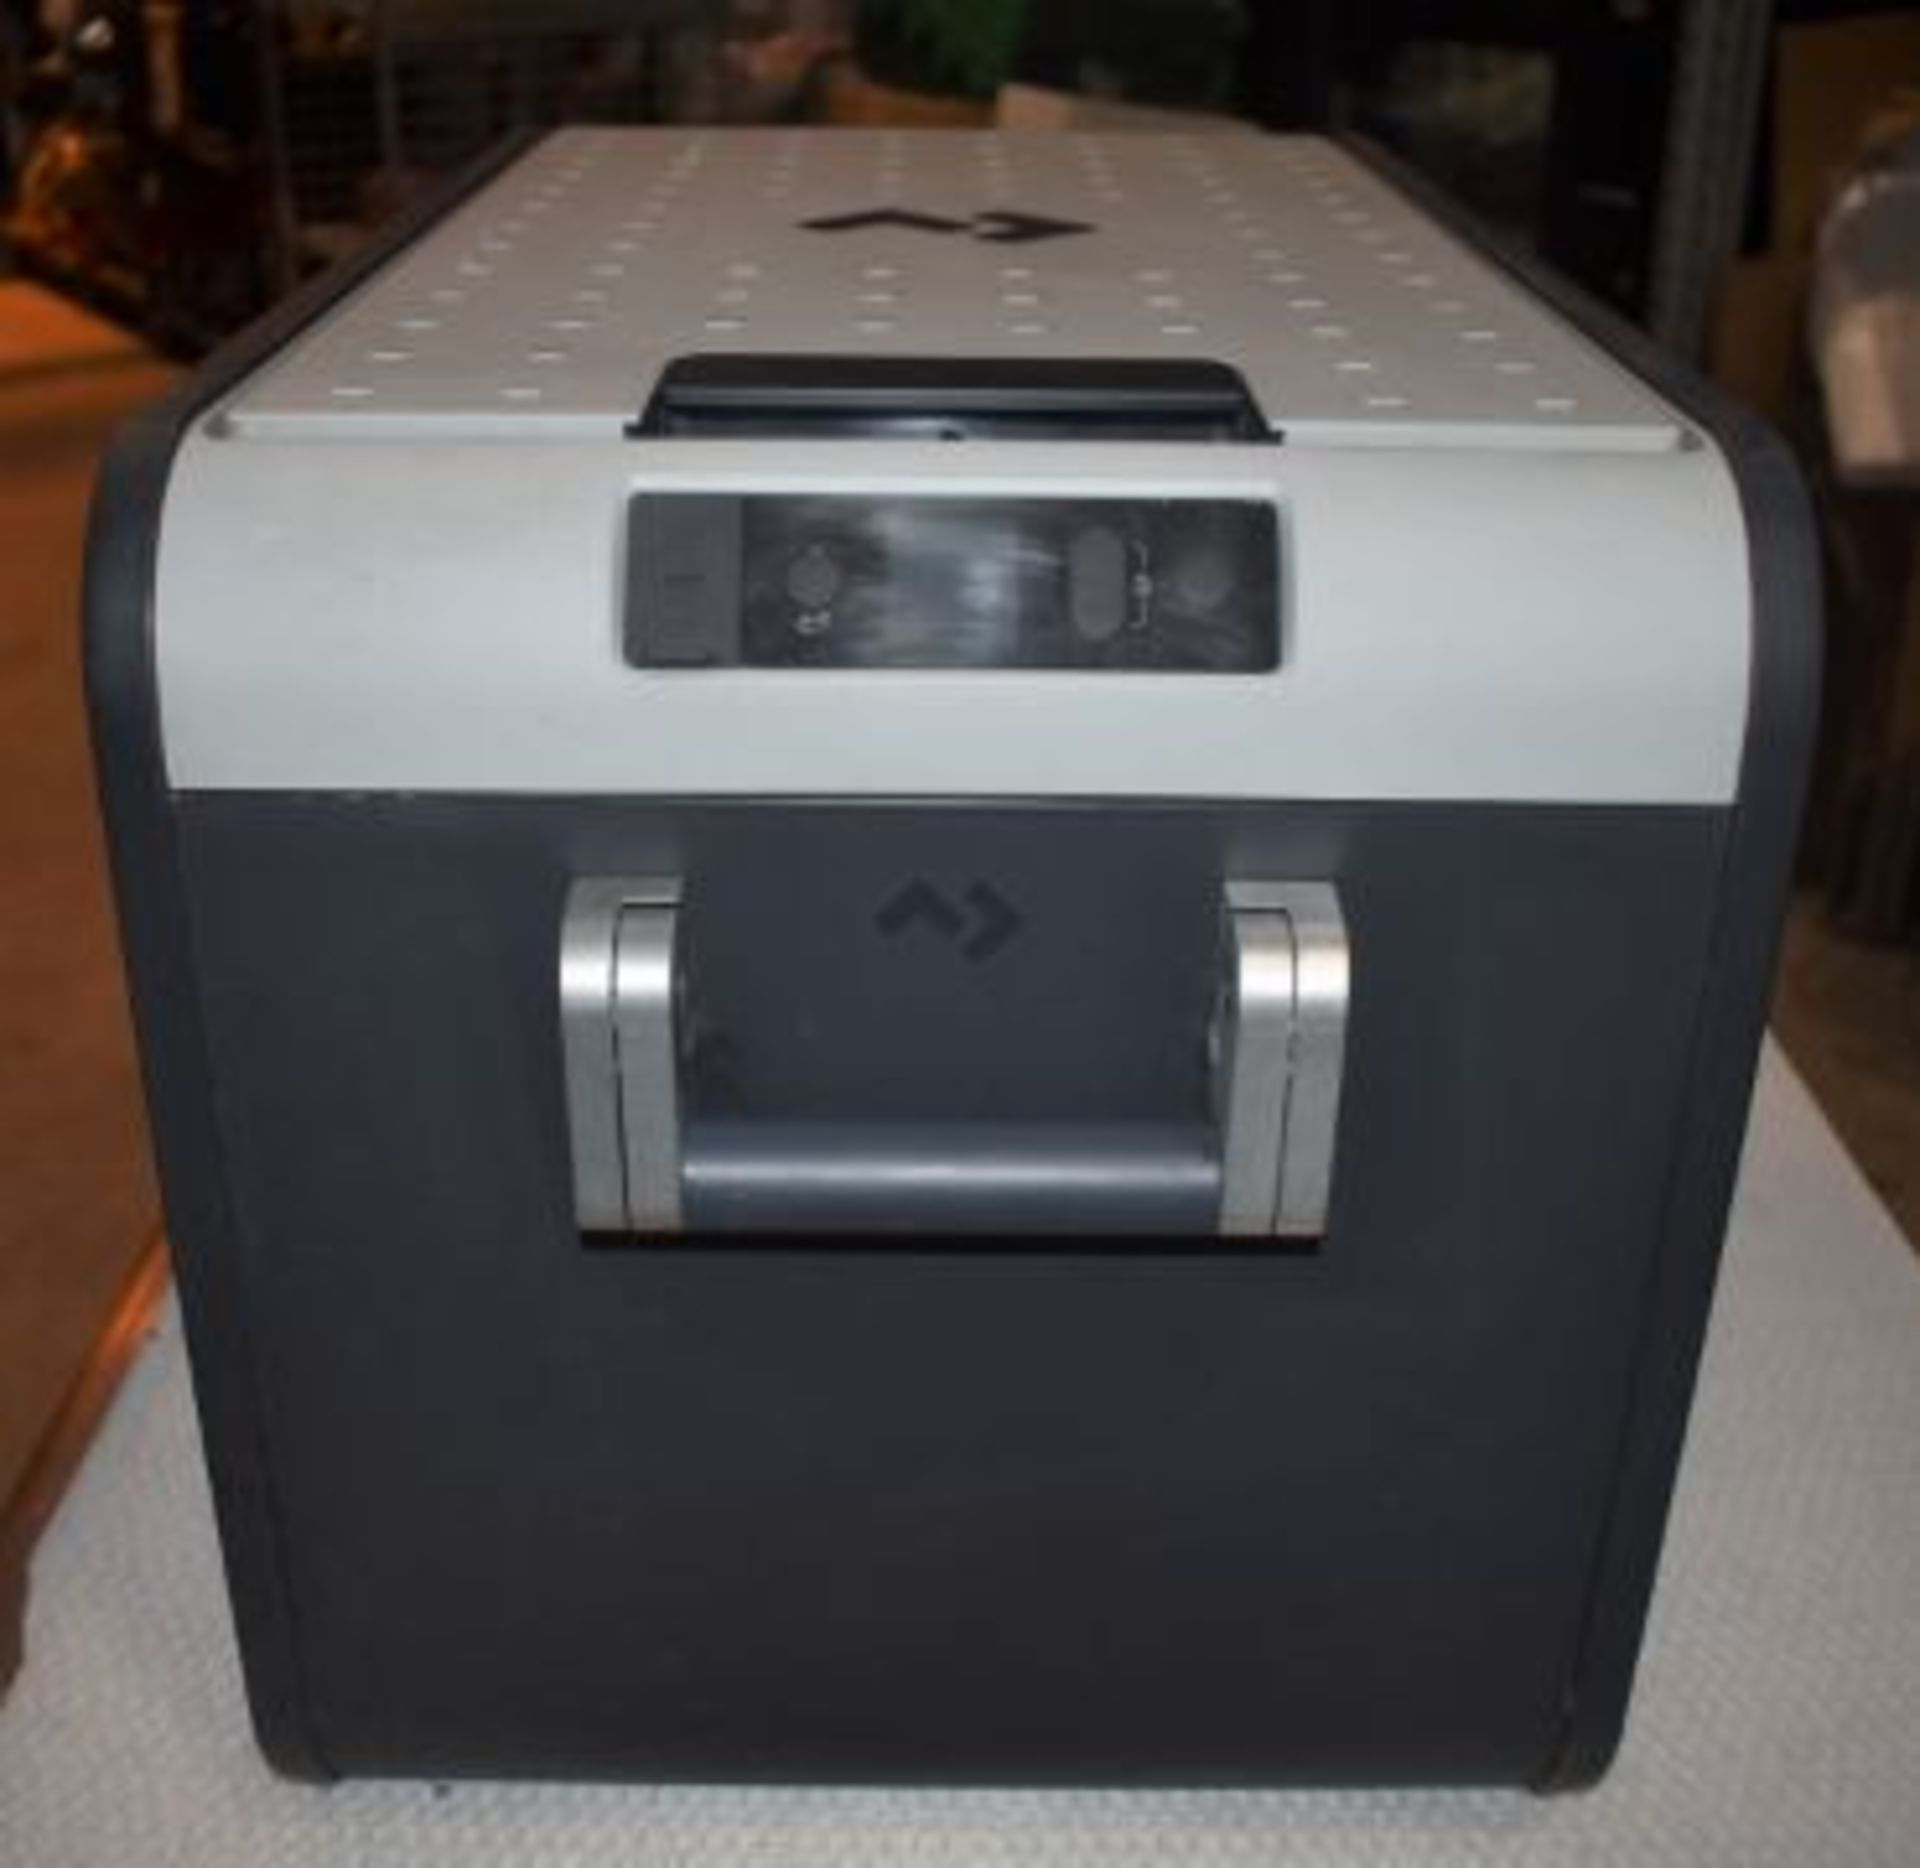 1 x Dometic CFX3 35 Portable 32l Compressor Cooler and Freezer - Perfect For Cooling The Christmas - Image 5 of 9